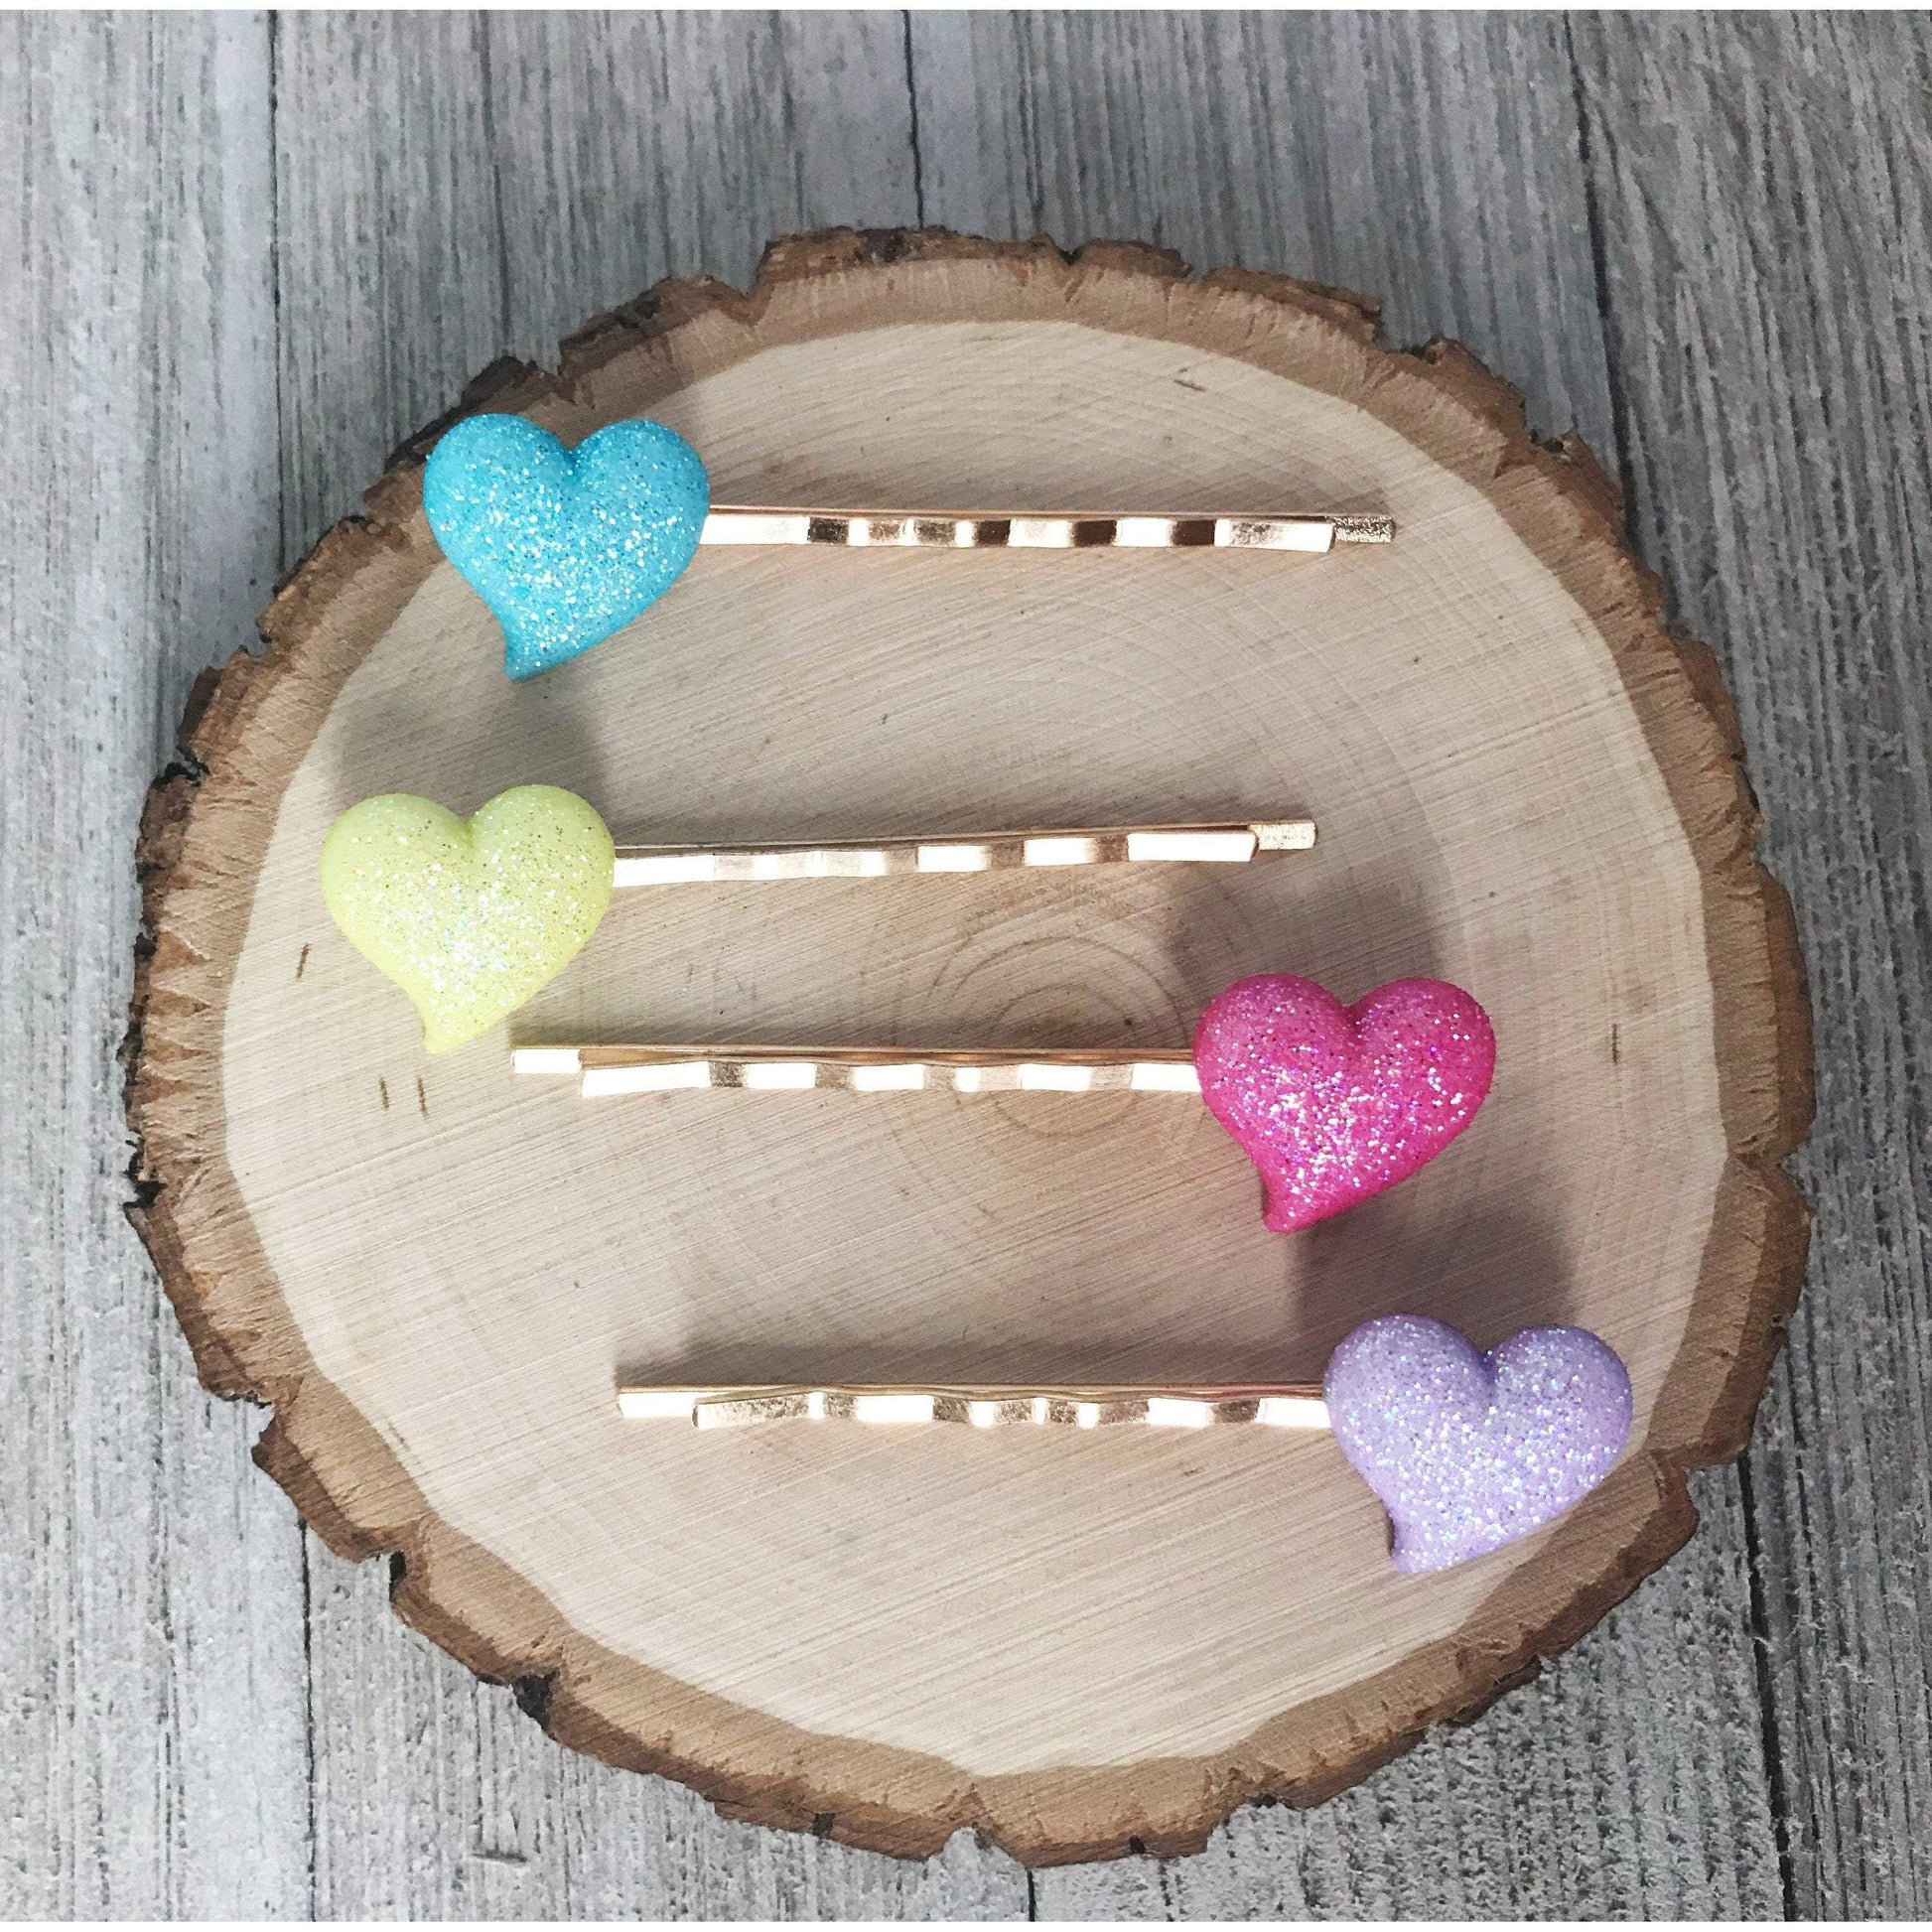 Pink, Purple, Yellow & Blue Glitter Heart Hair Pins - Sparkling & Colorful Hair Accessories